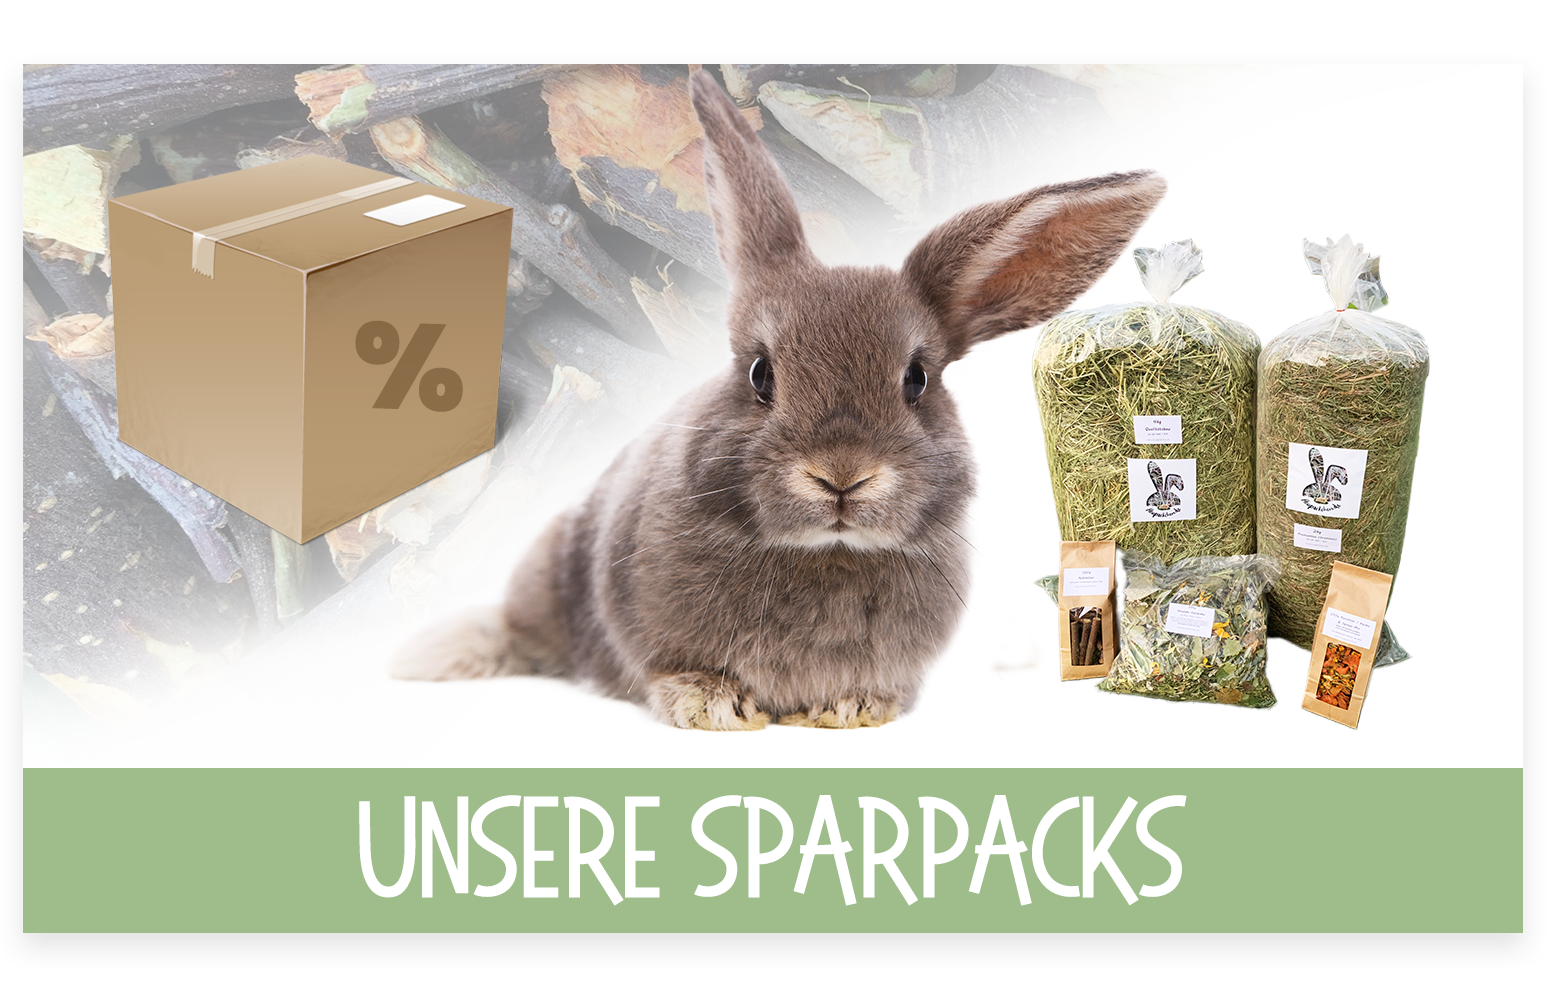 Unsere Sparpacks